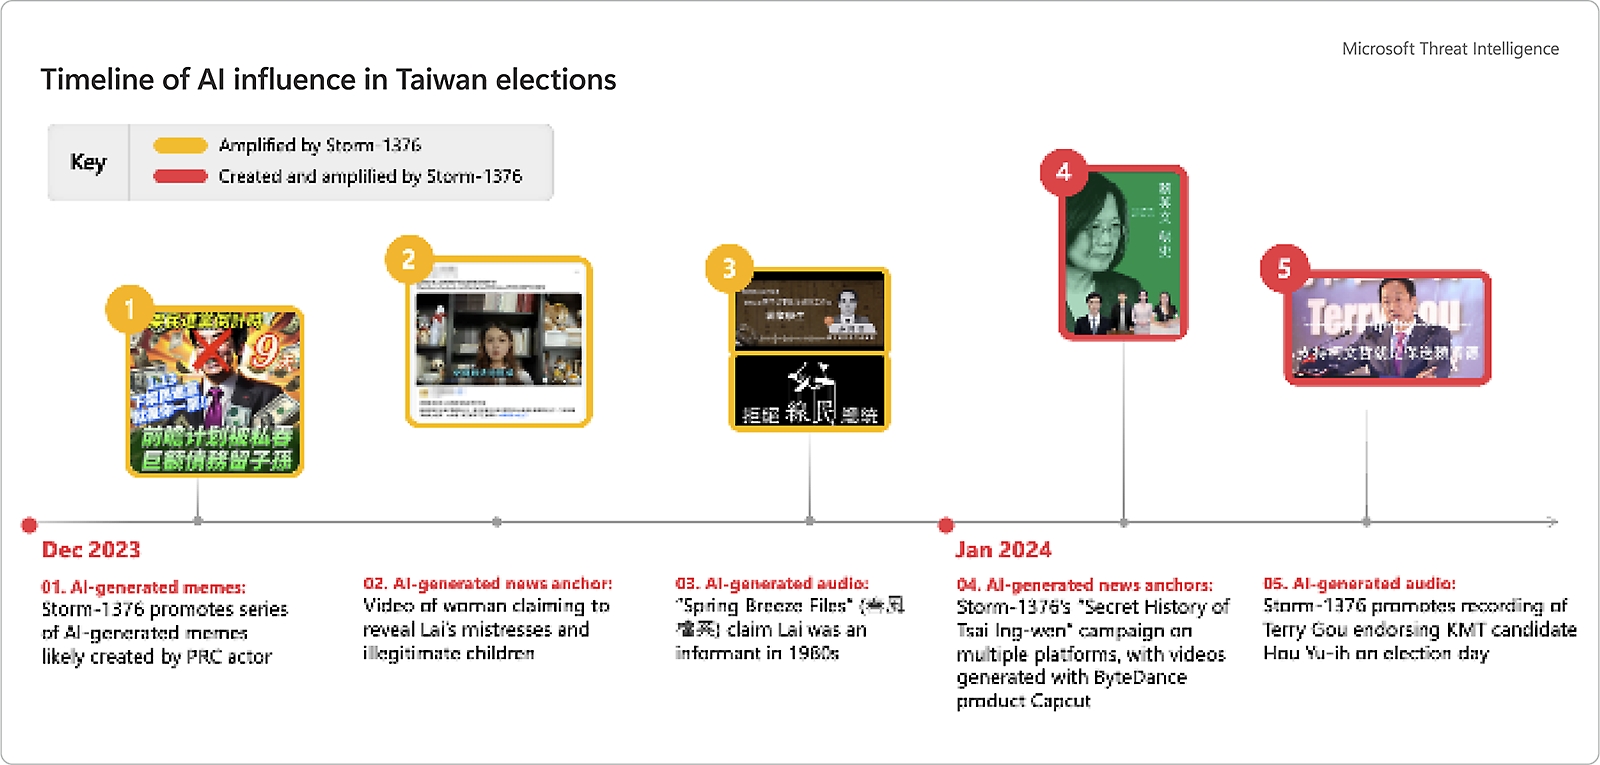 Timeline infographic showing the influence of ai-generated content on taiwan elections from december 2023 to january 2024.